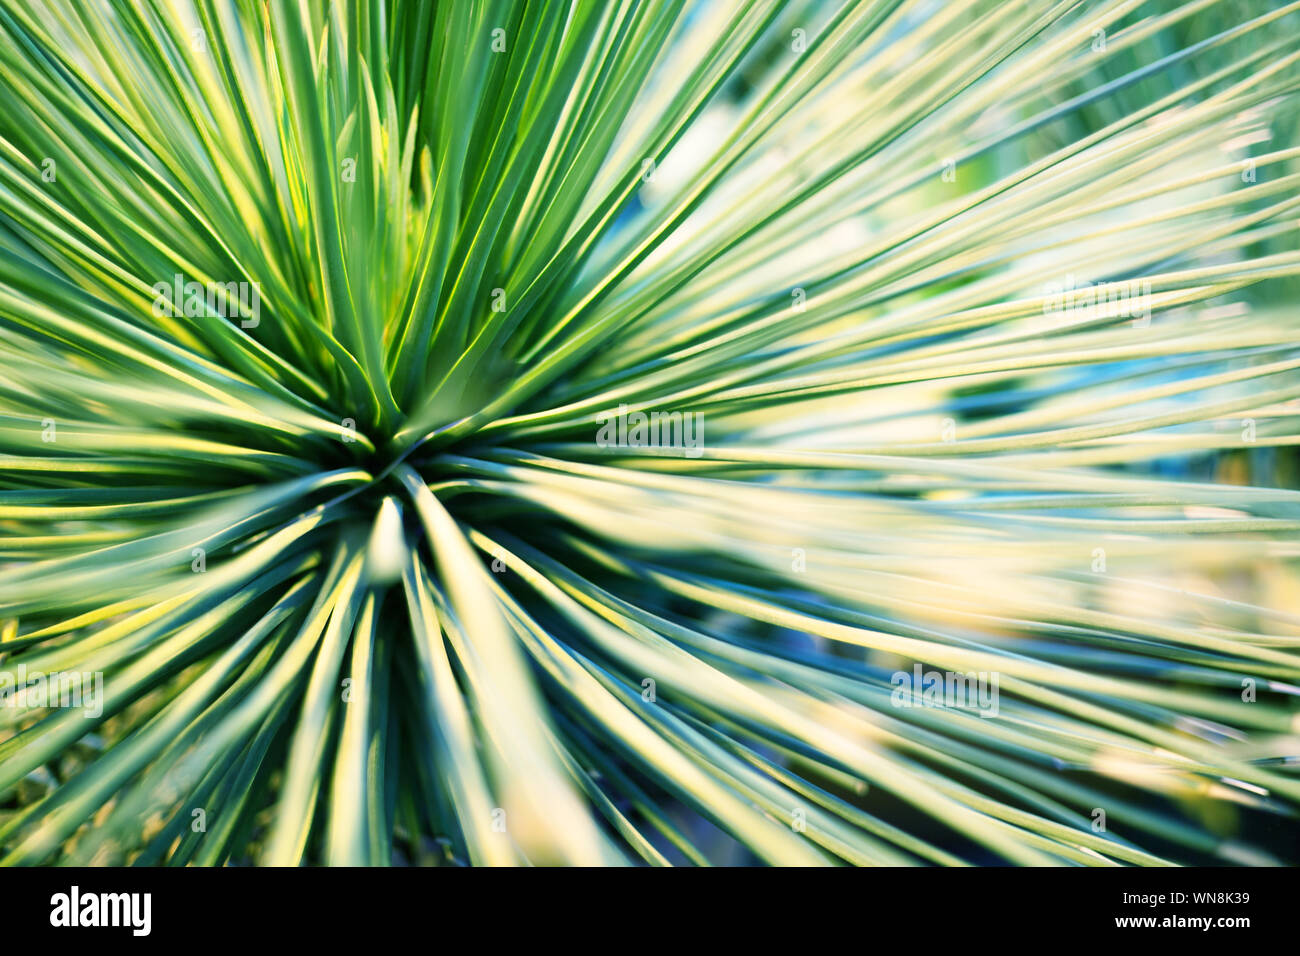 Bright green leaves of palm tree or ornamental houseplant blurred background close up macro Stock Photo